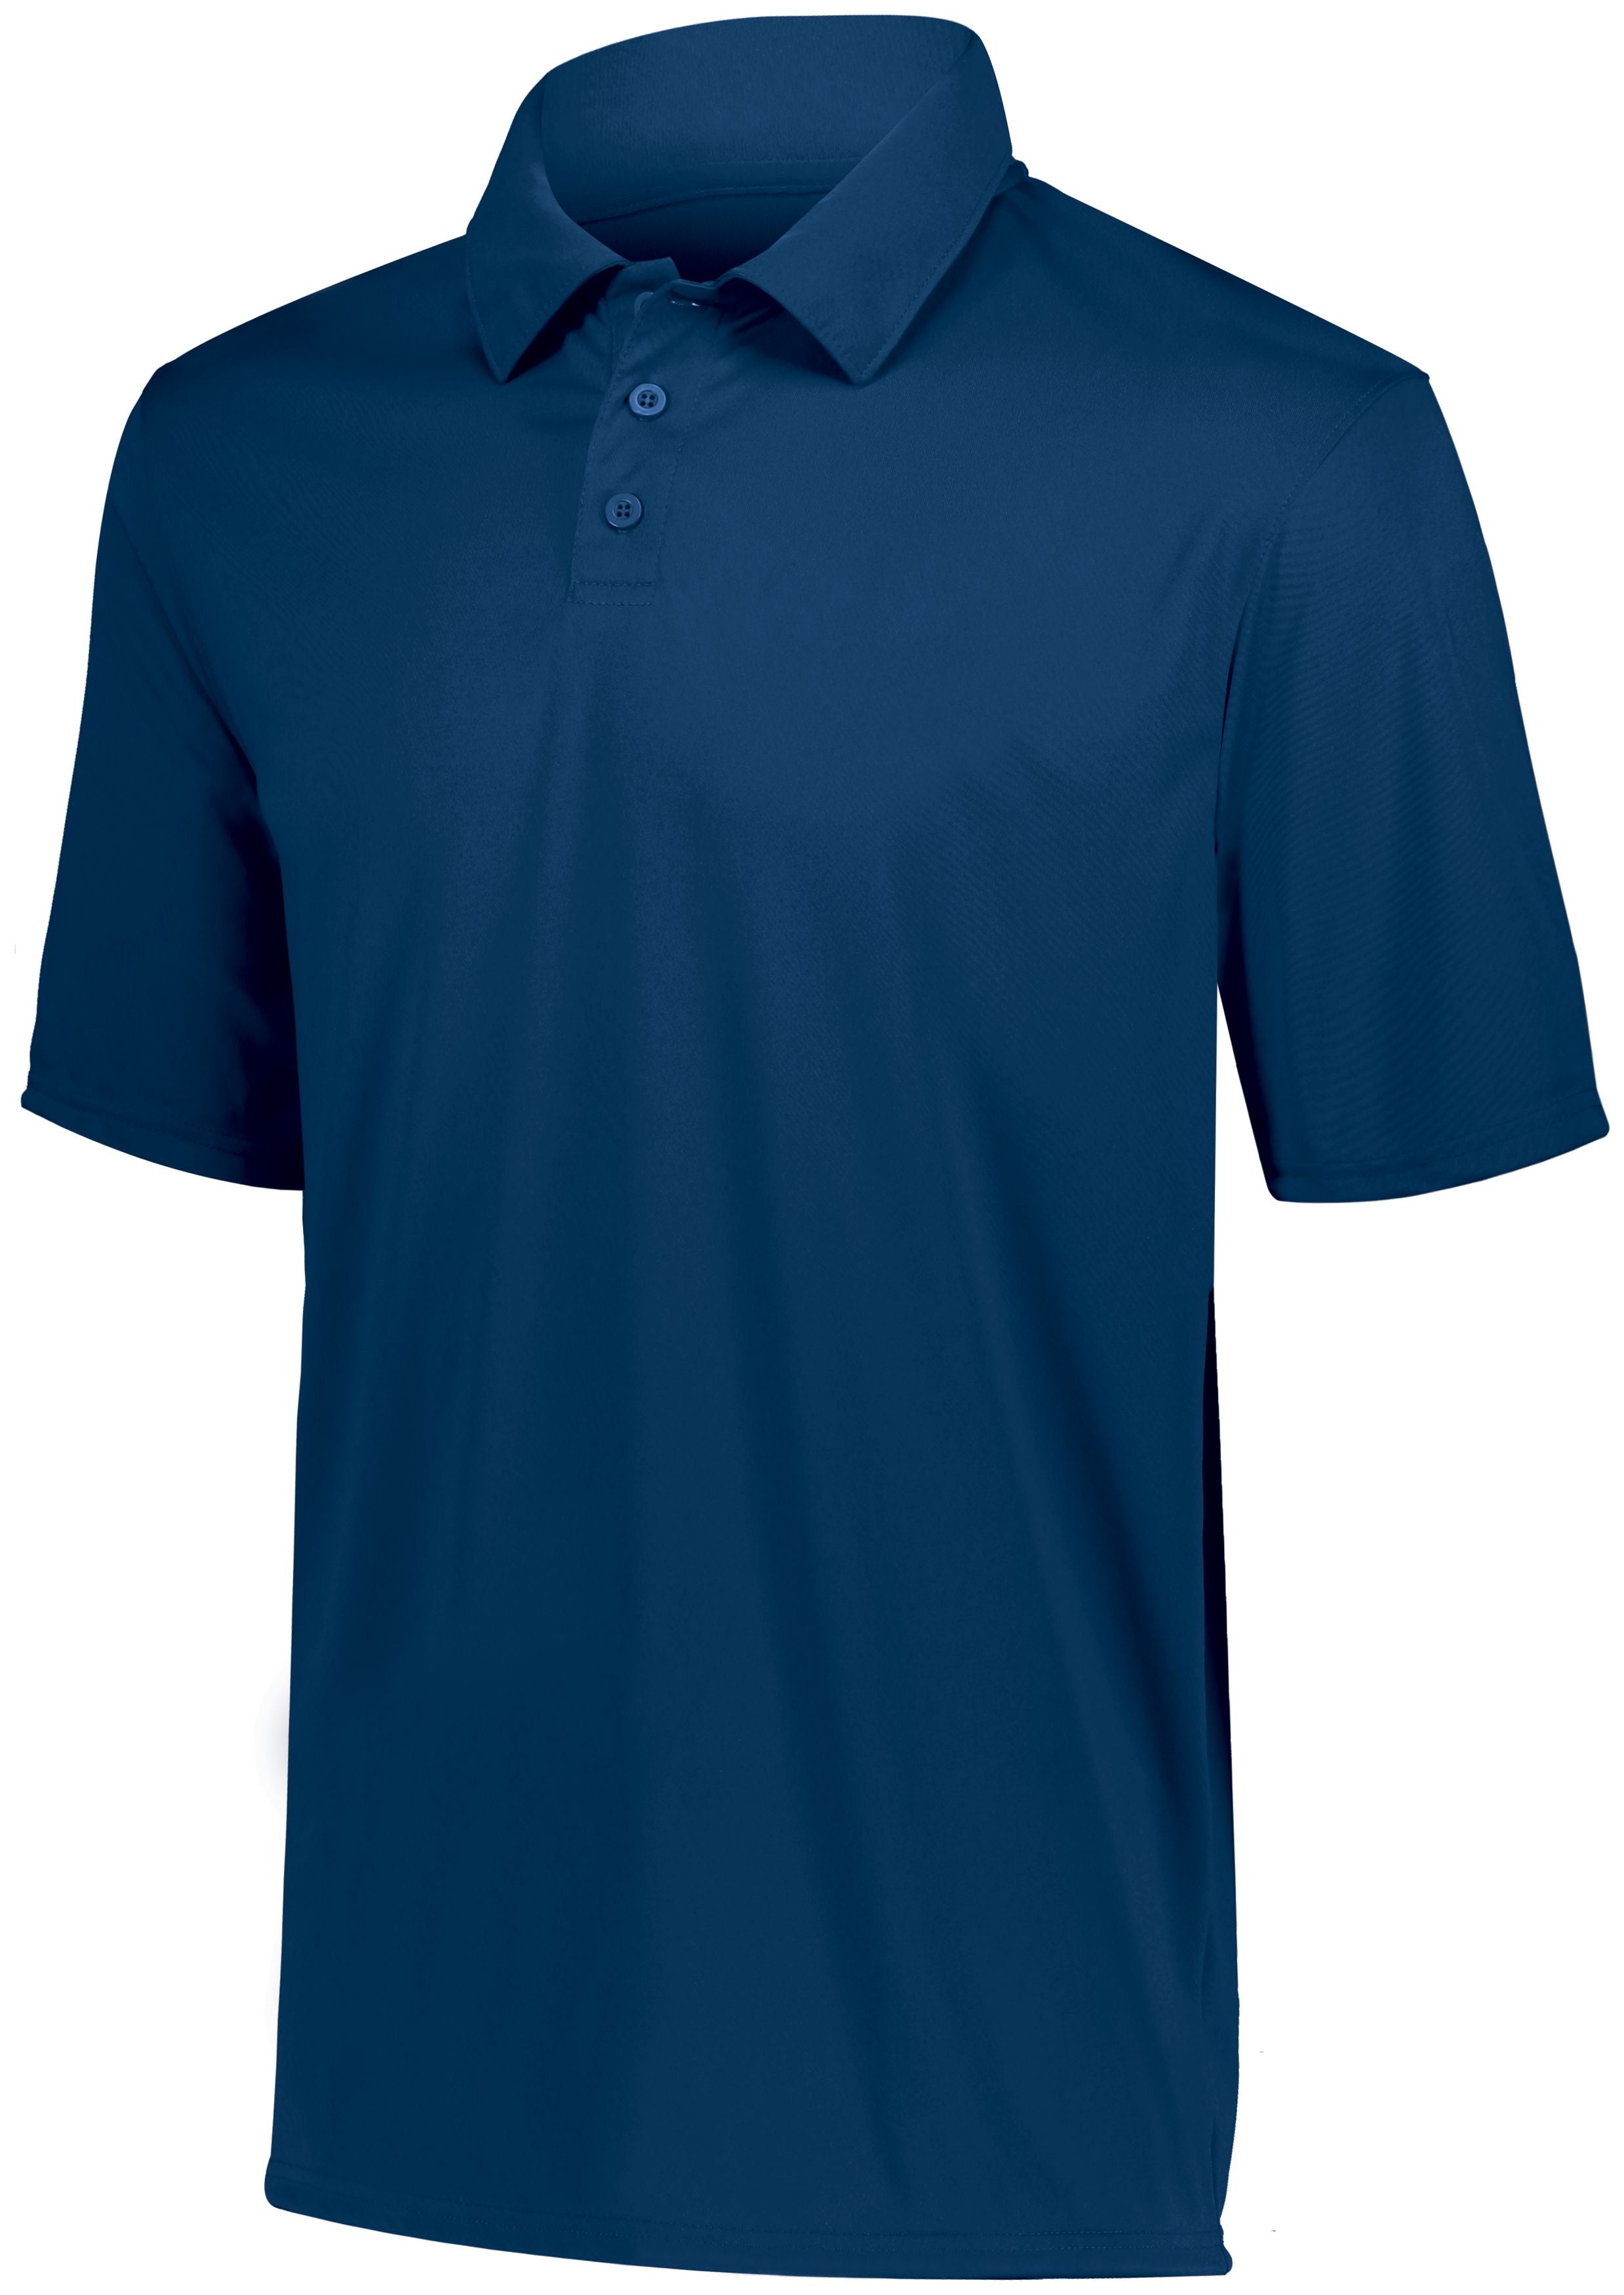 Augusta Sportswear Youth Vital Polo in Navy  -Part of the Youth, Youth-Polo, Polos, Augusta-Products, Shirts product lines at KanaleyCreations.com